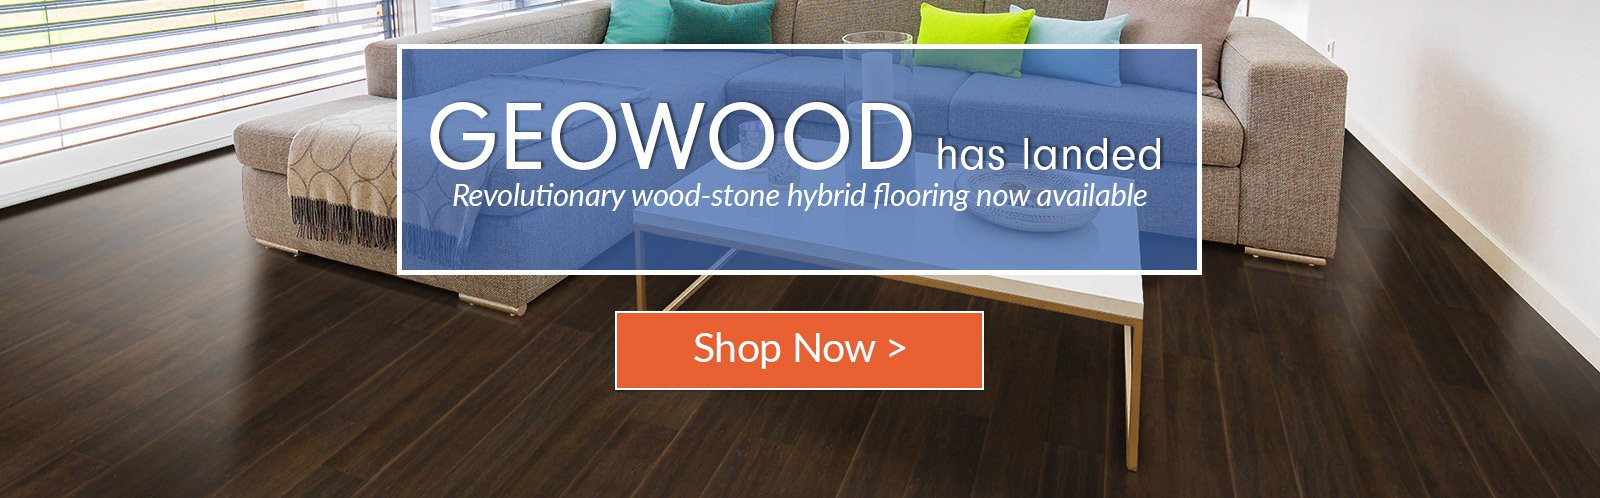 21 Nice Hardwood Floor Quote 2022 free download hardwood floor quote of green building construction materials and home decor cali bamboo within geowood launch homepage slider